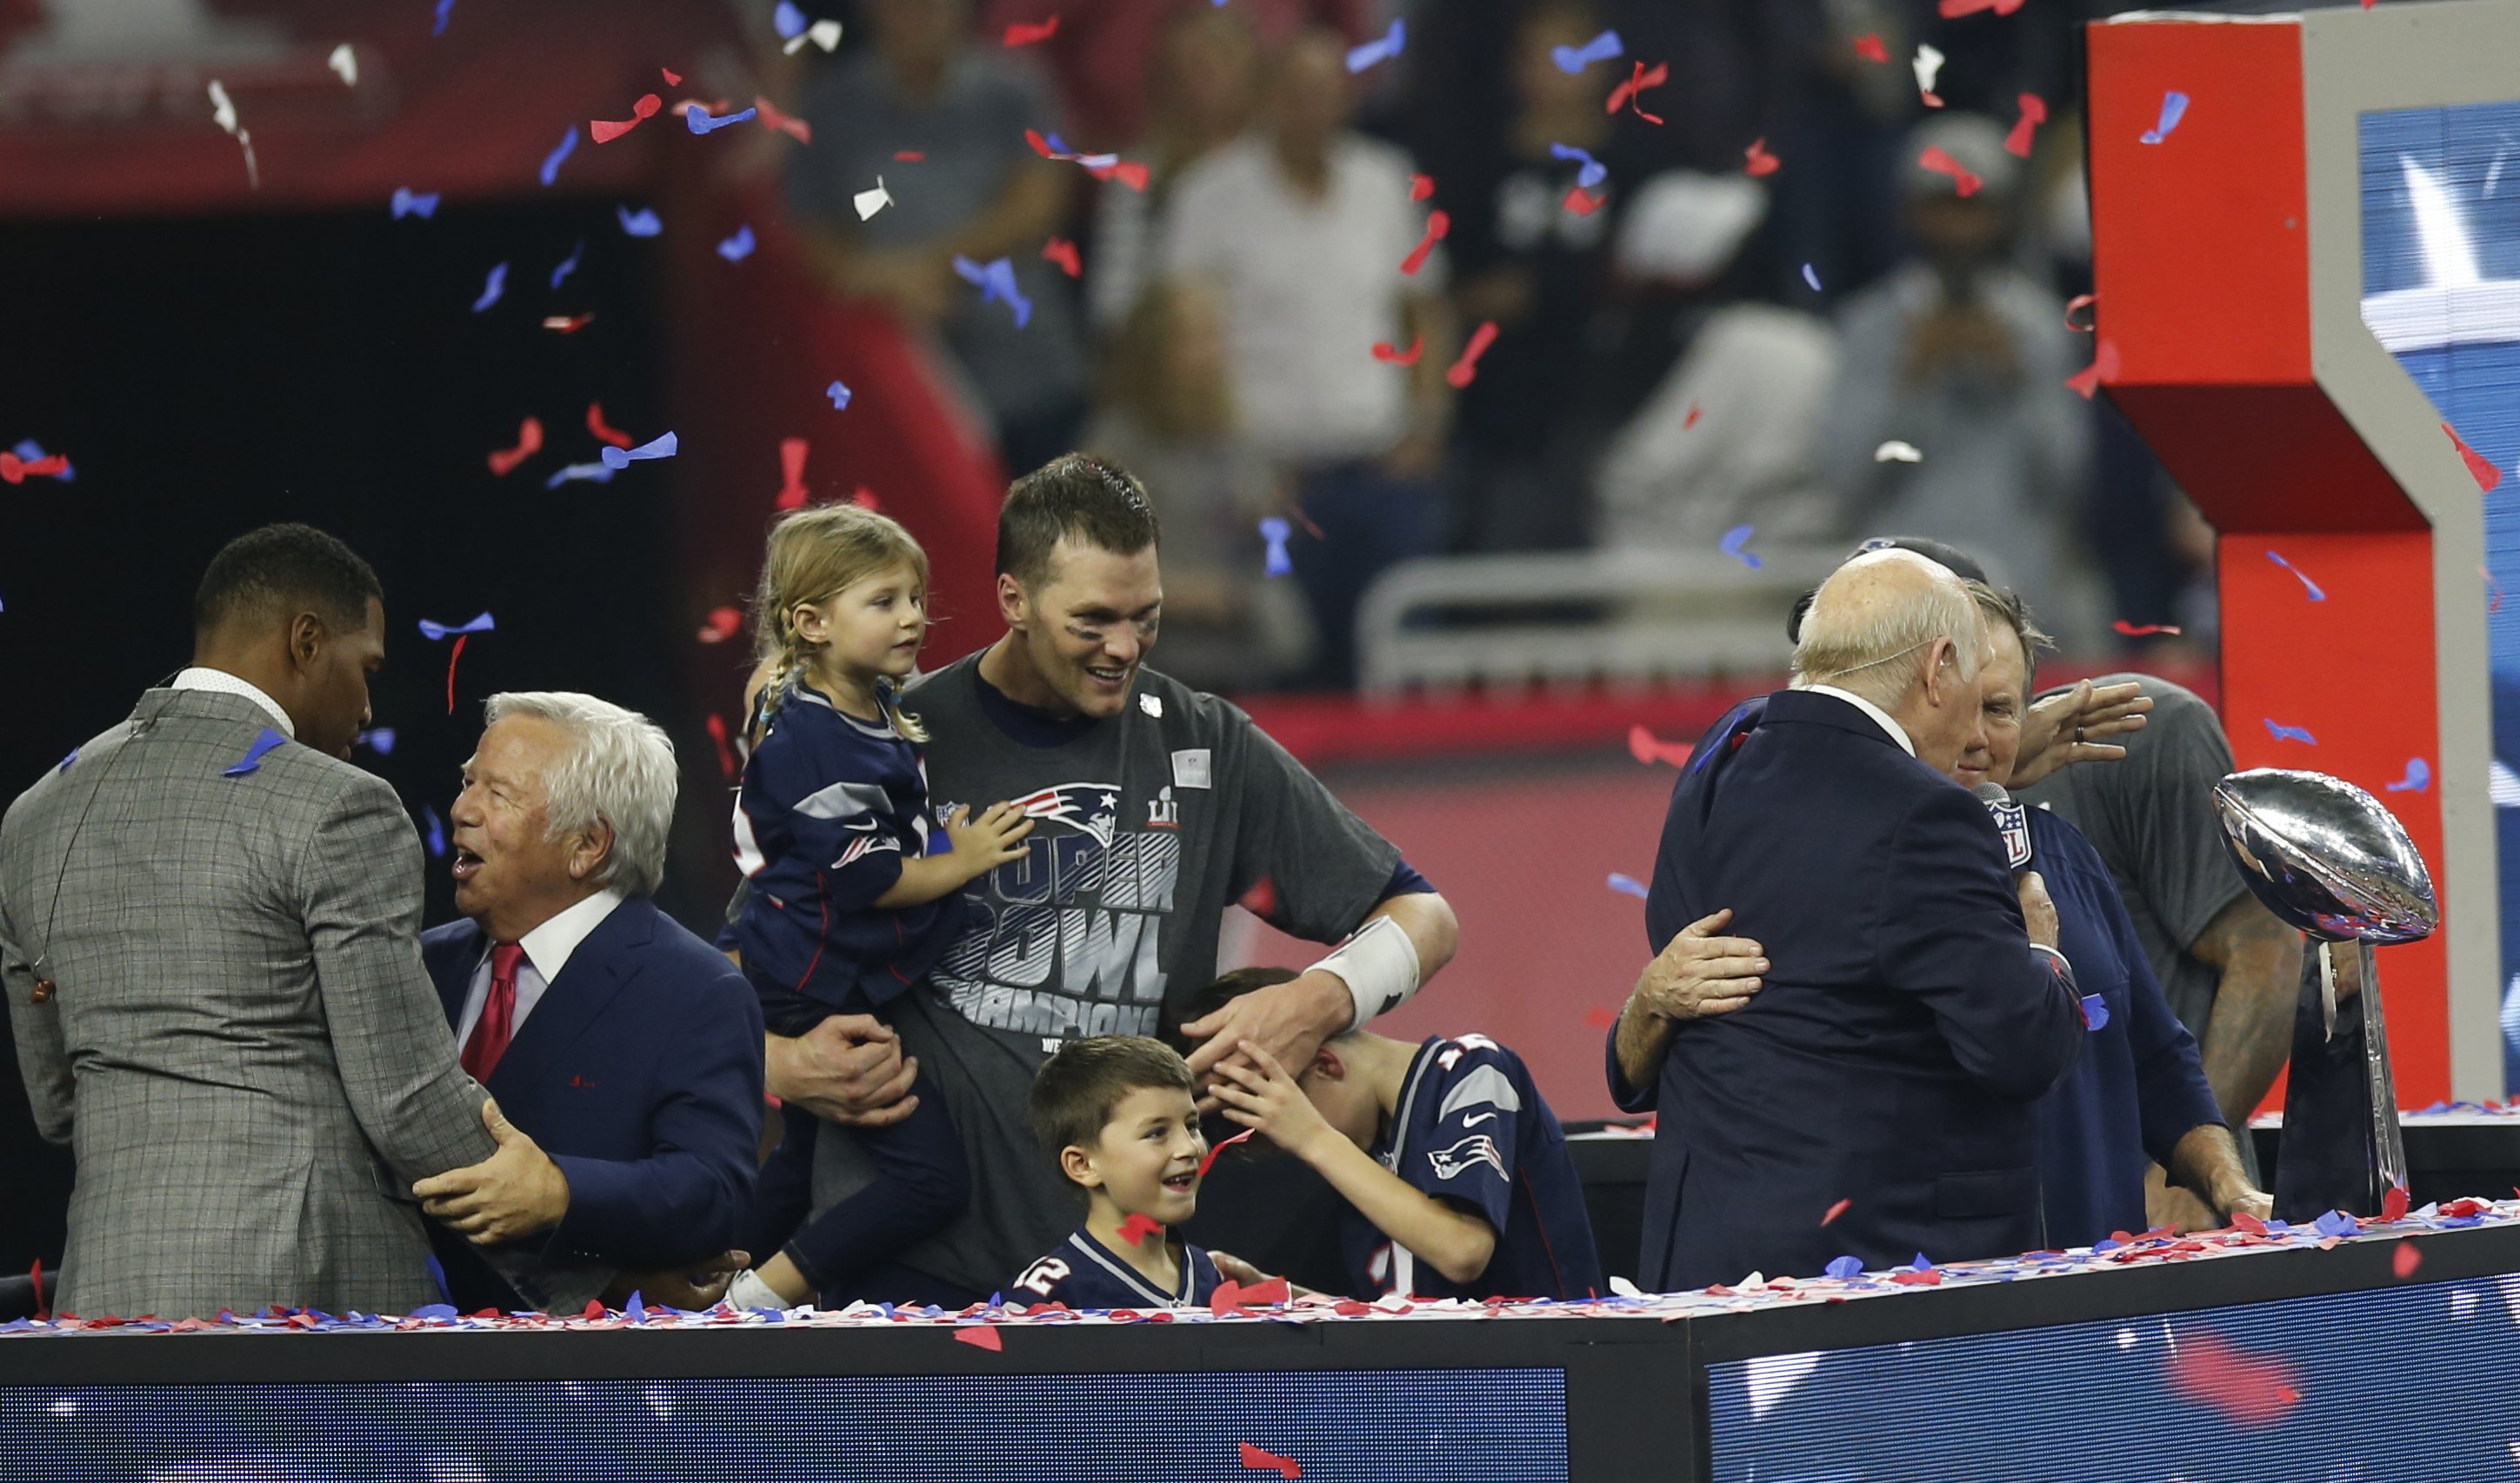 Tom Brady #12 of the New England Patriots celebrates with his kids following Super Bowl 51 against the Atlanta Falcons at NRG Stadium on February 5, 2017 in Houston, Texas | Source: Getty Images 